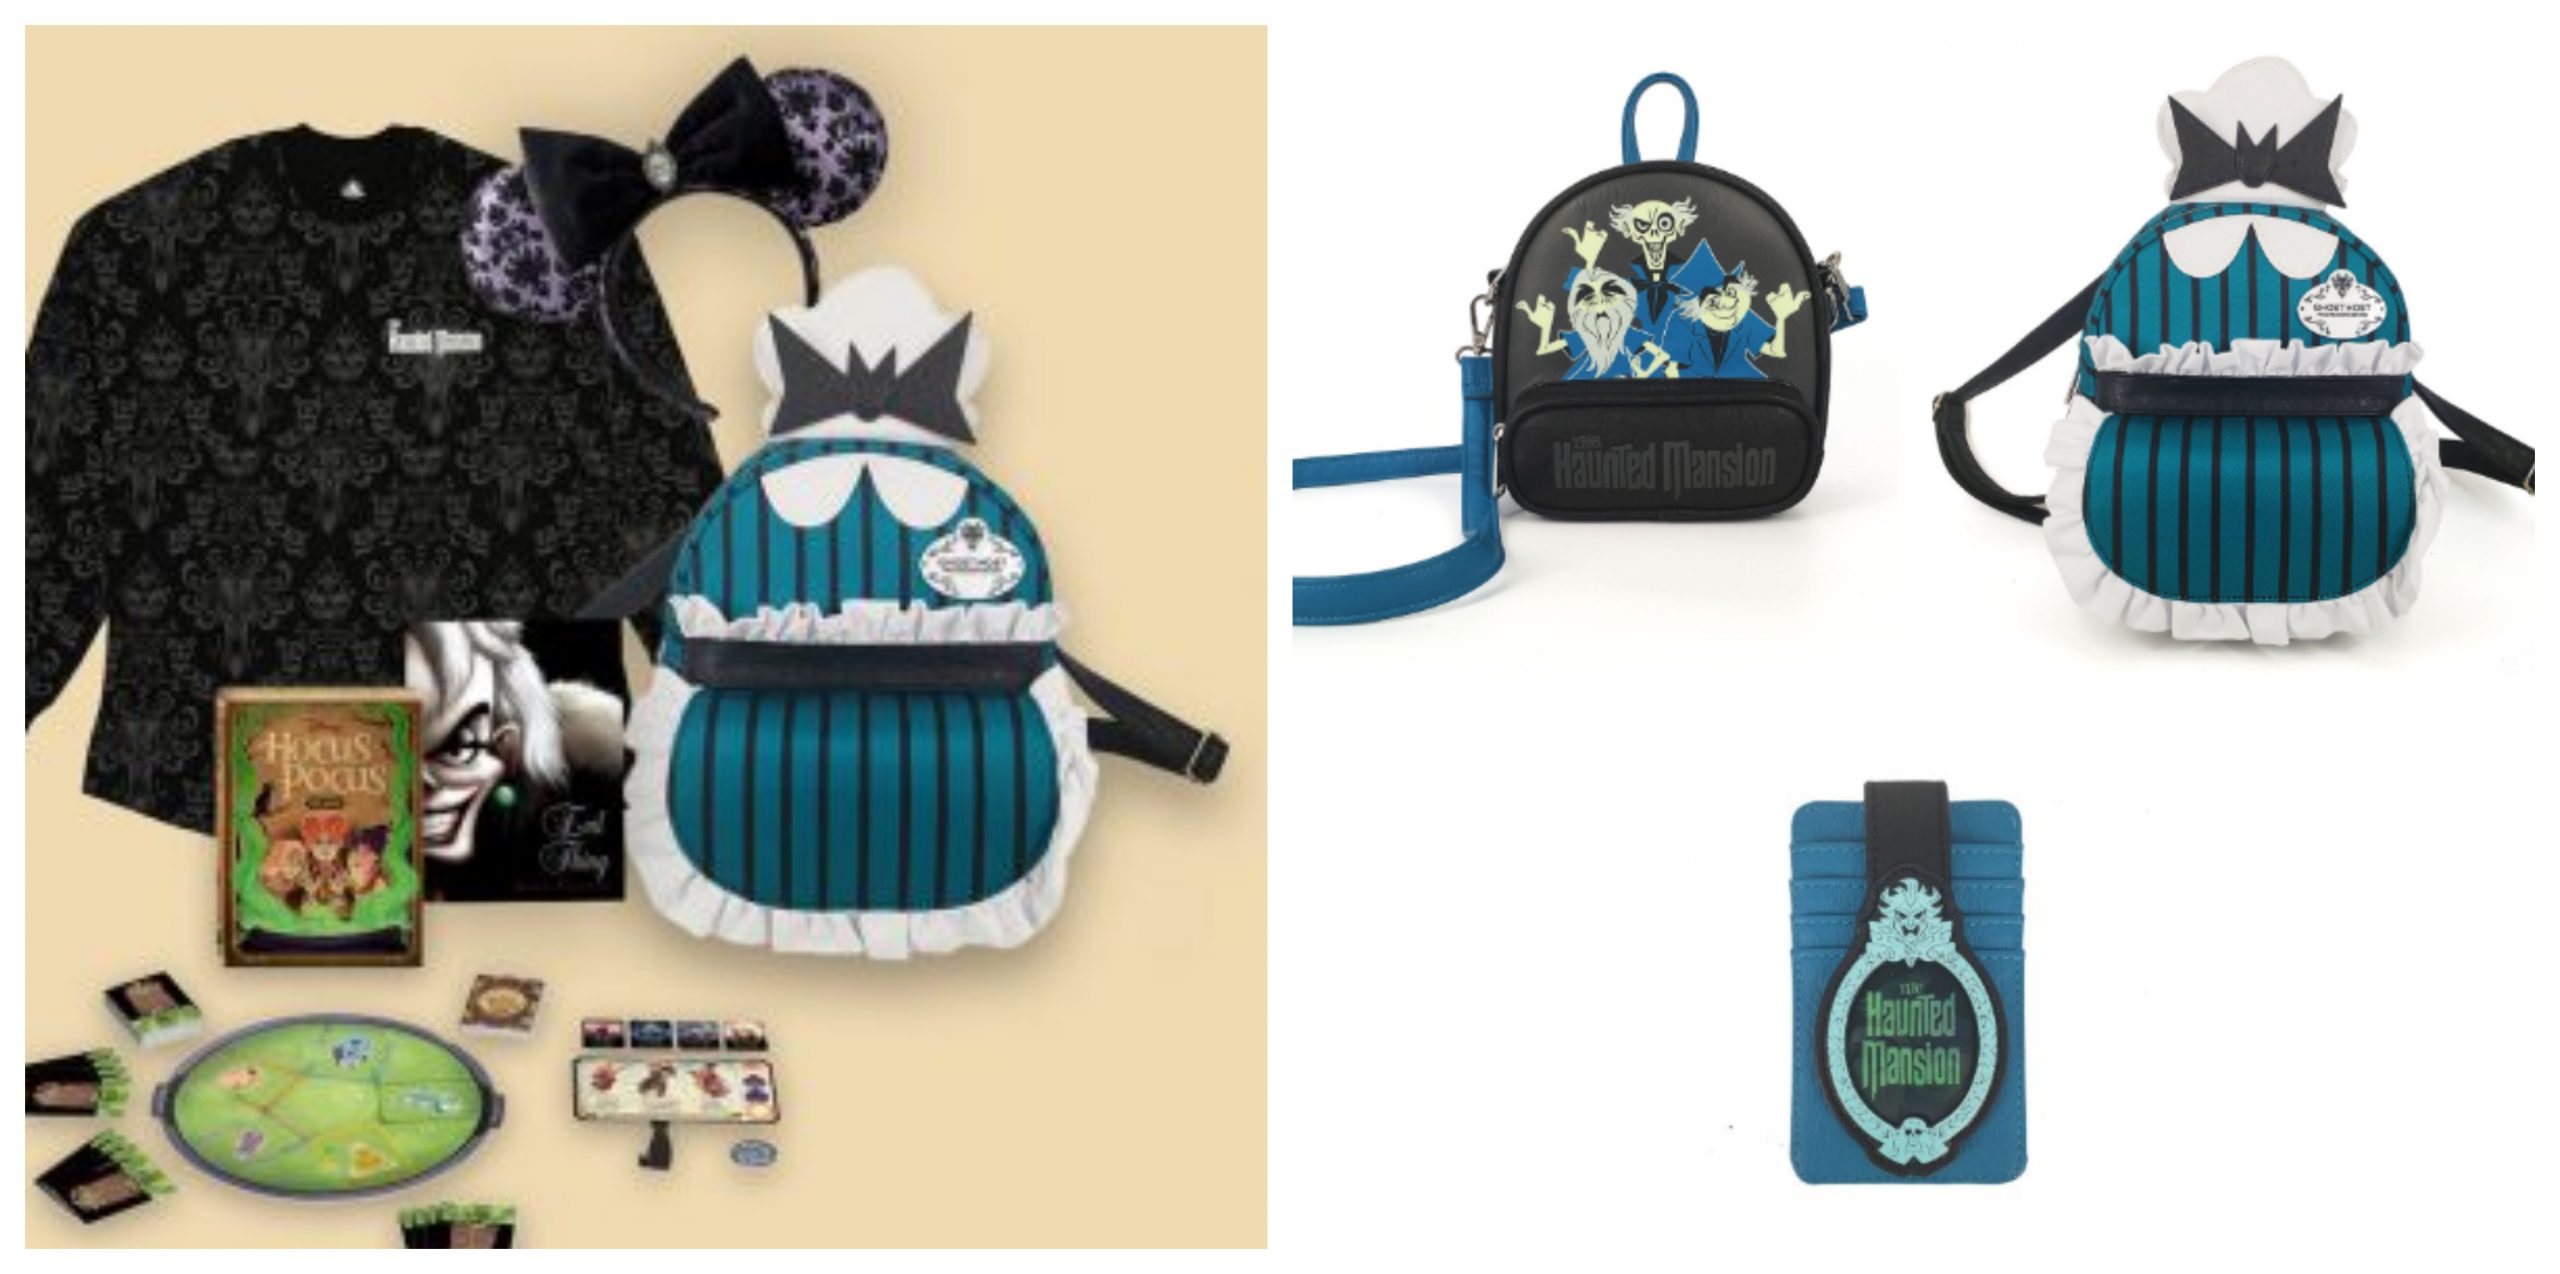 Disney Shares new Halfway to Halloween Products!